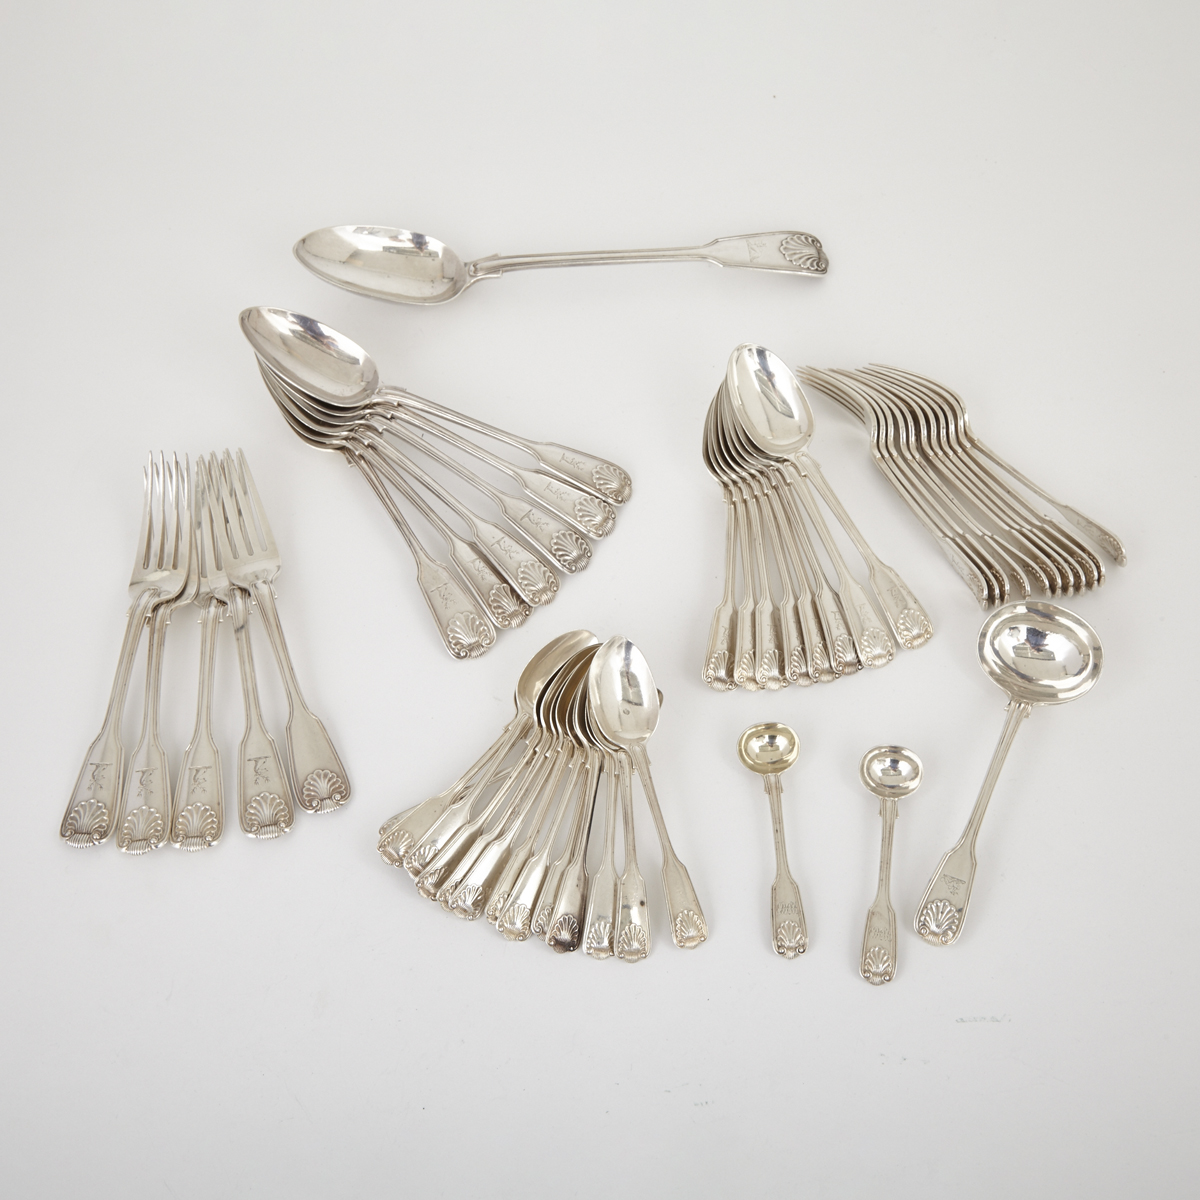 Assembled Victorian Silver Fiddle, Thread and Shell Pattern Flatware Service, mainly George Adams, London, 1825-1902